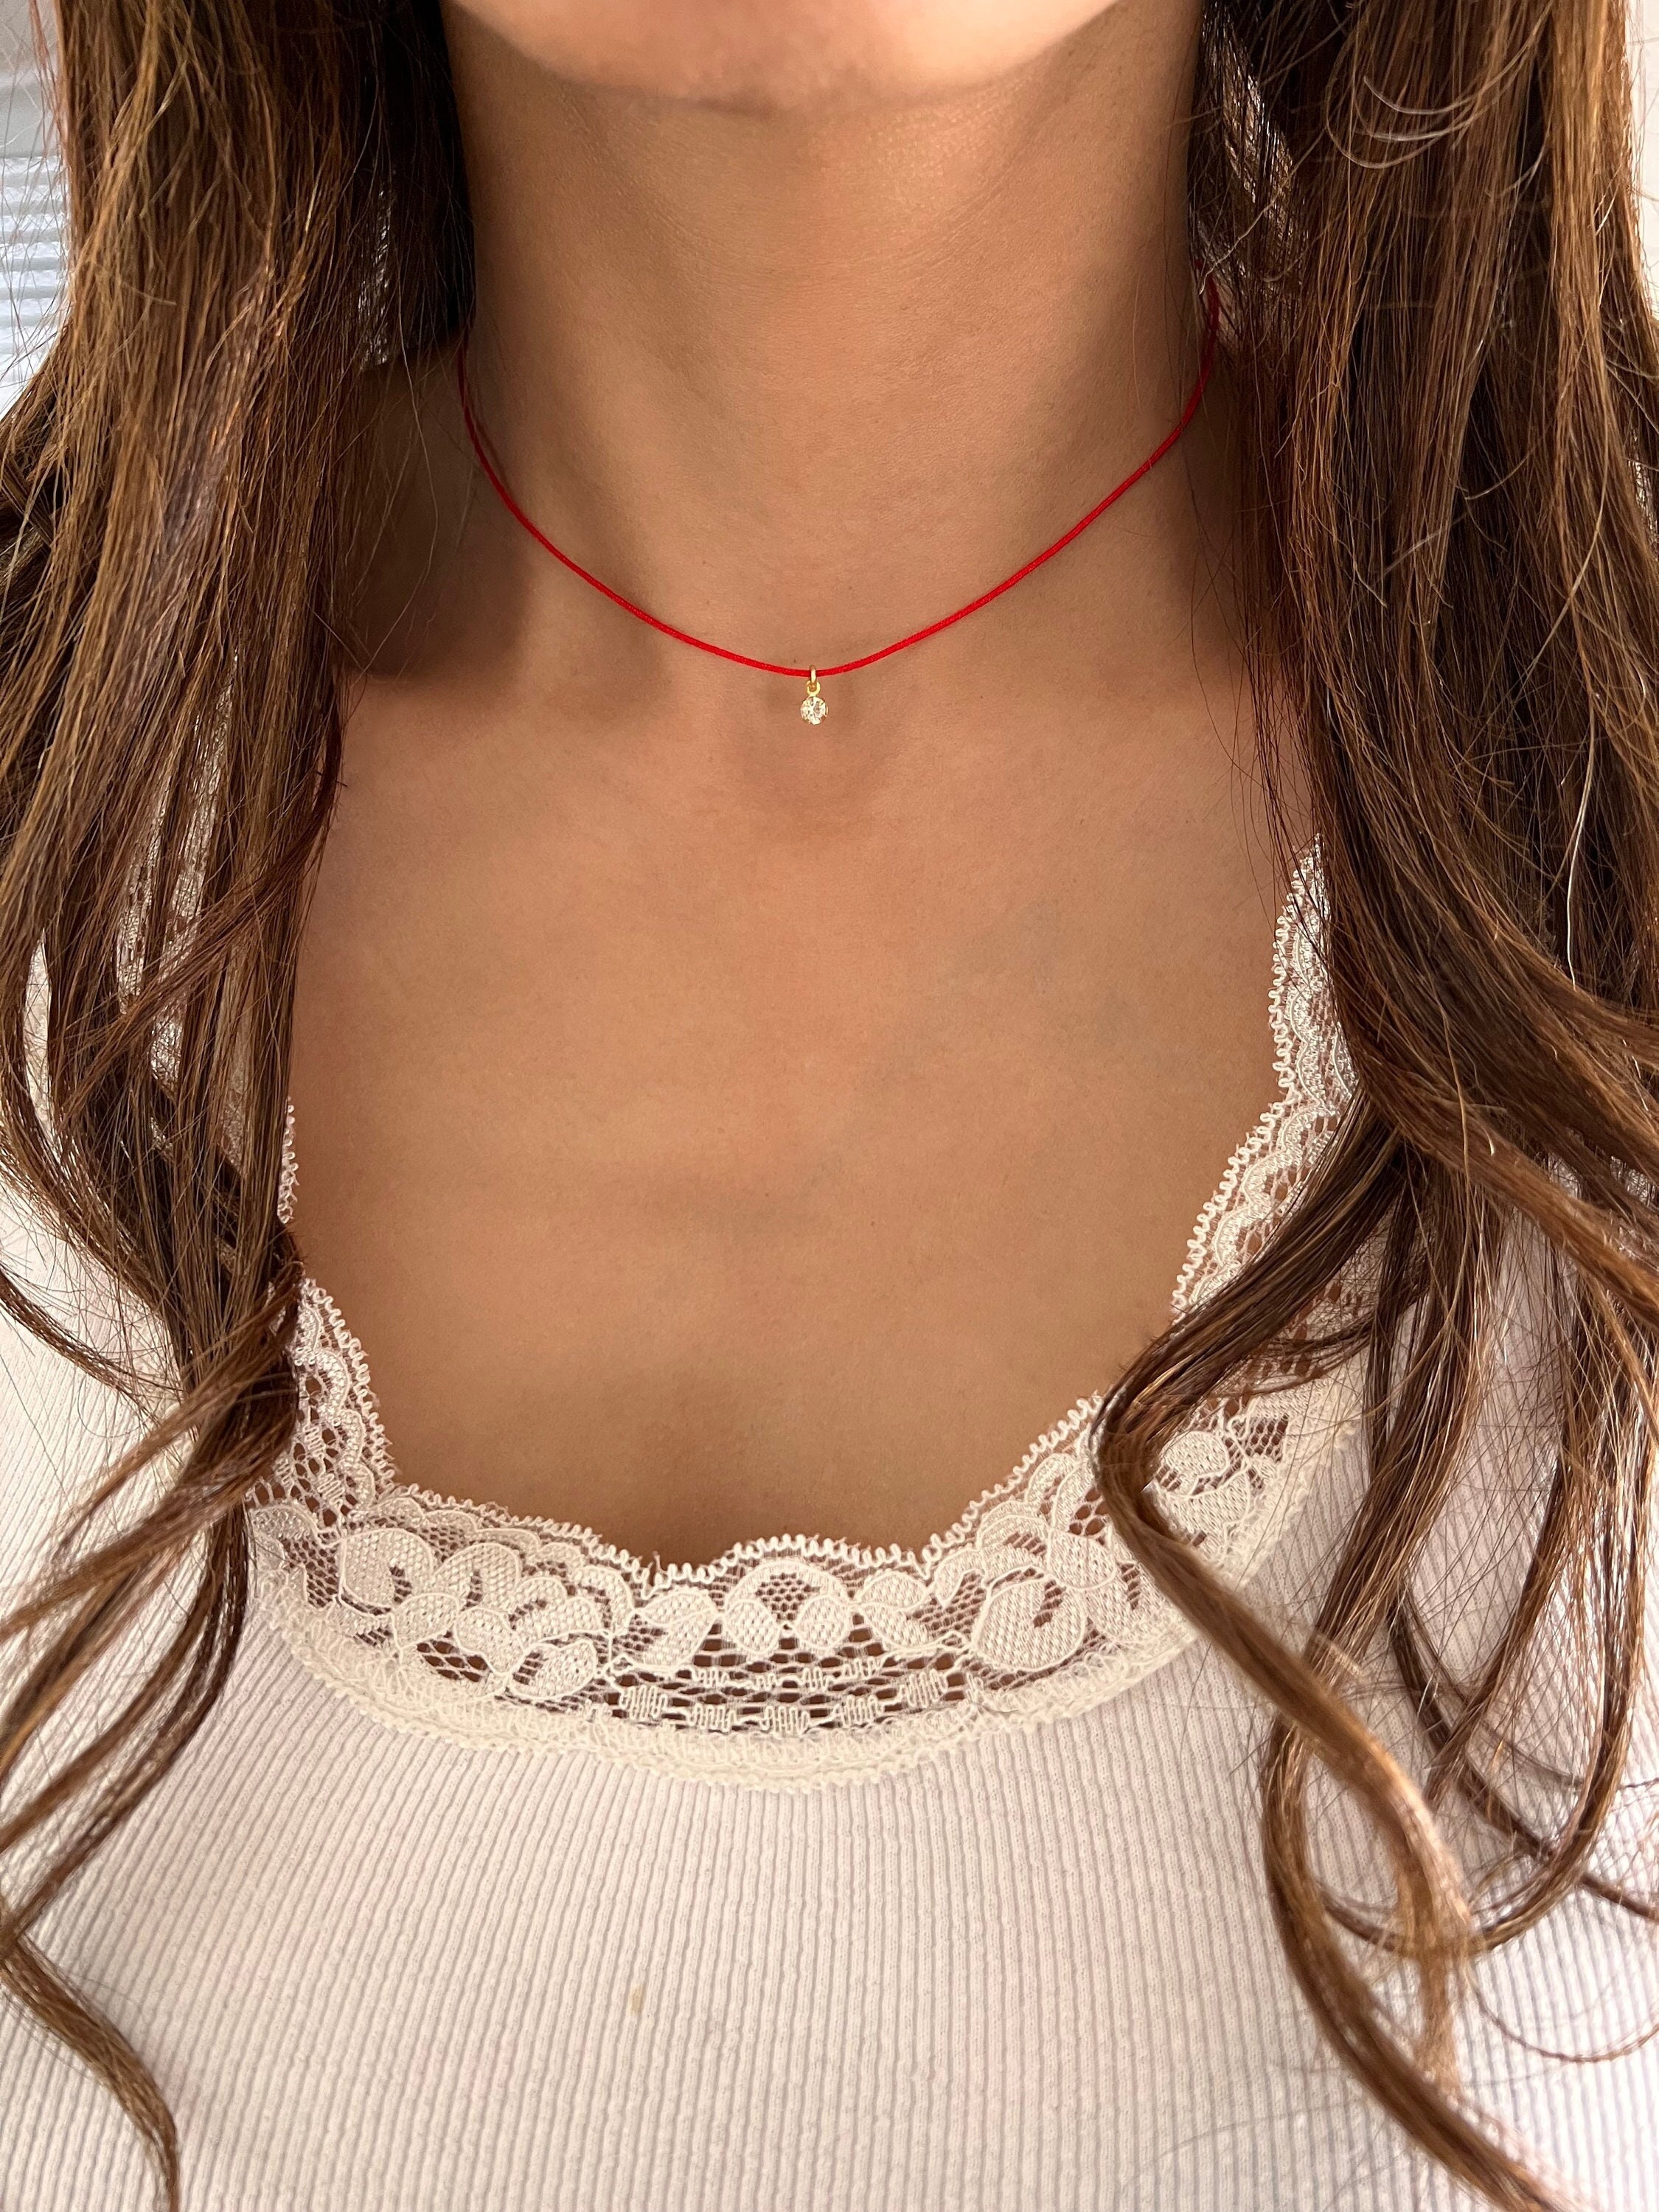 Red Satin Silk Cord Necklace